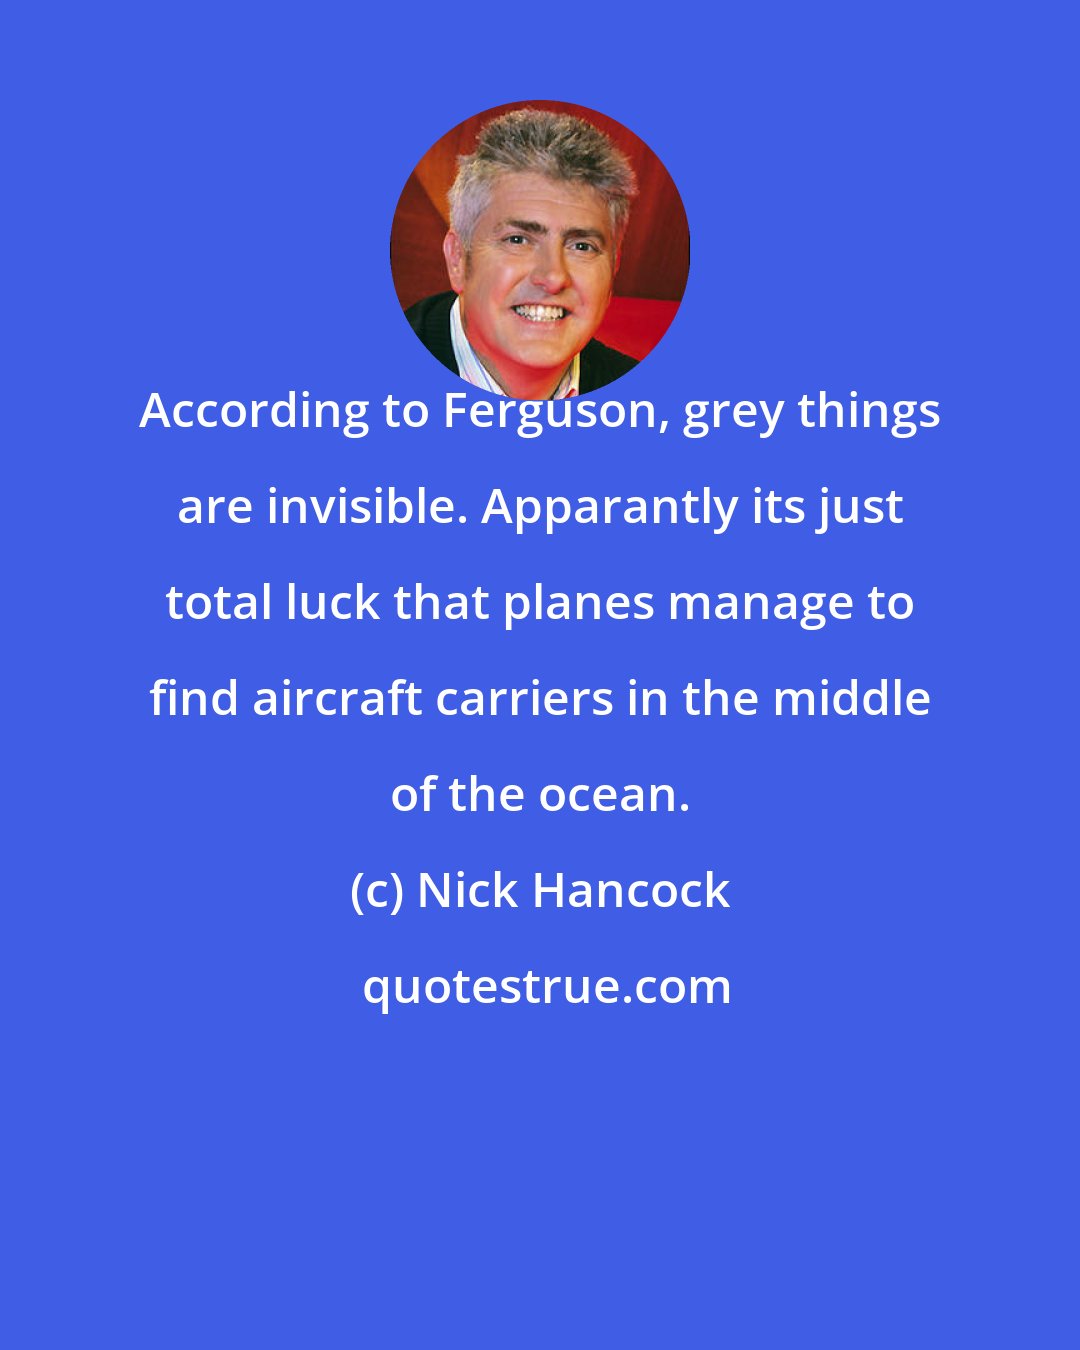 Nick Hancock: According to Ferguson, grey things are invisible. Apparantly its just total luck that planes manage to find aircraft carriers in the middle of the ocean.